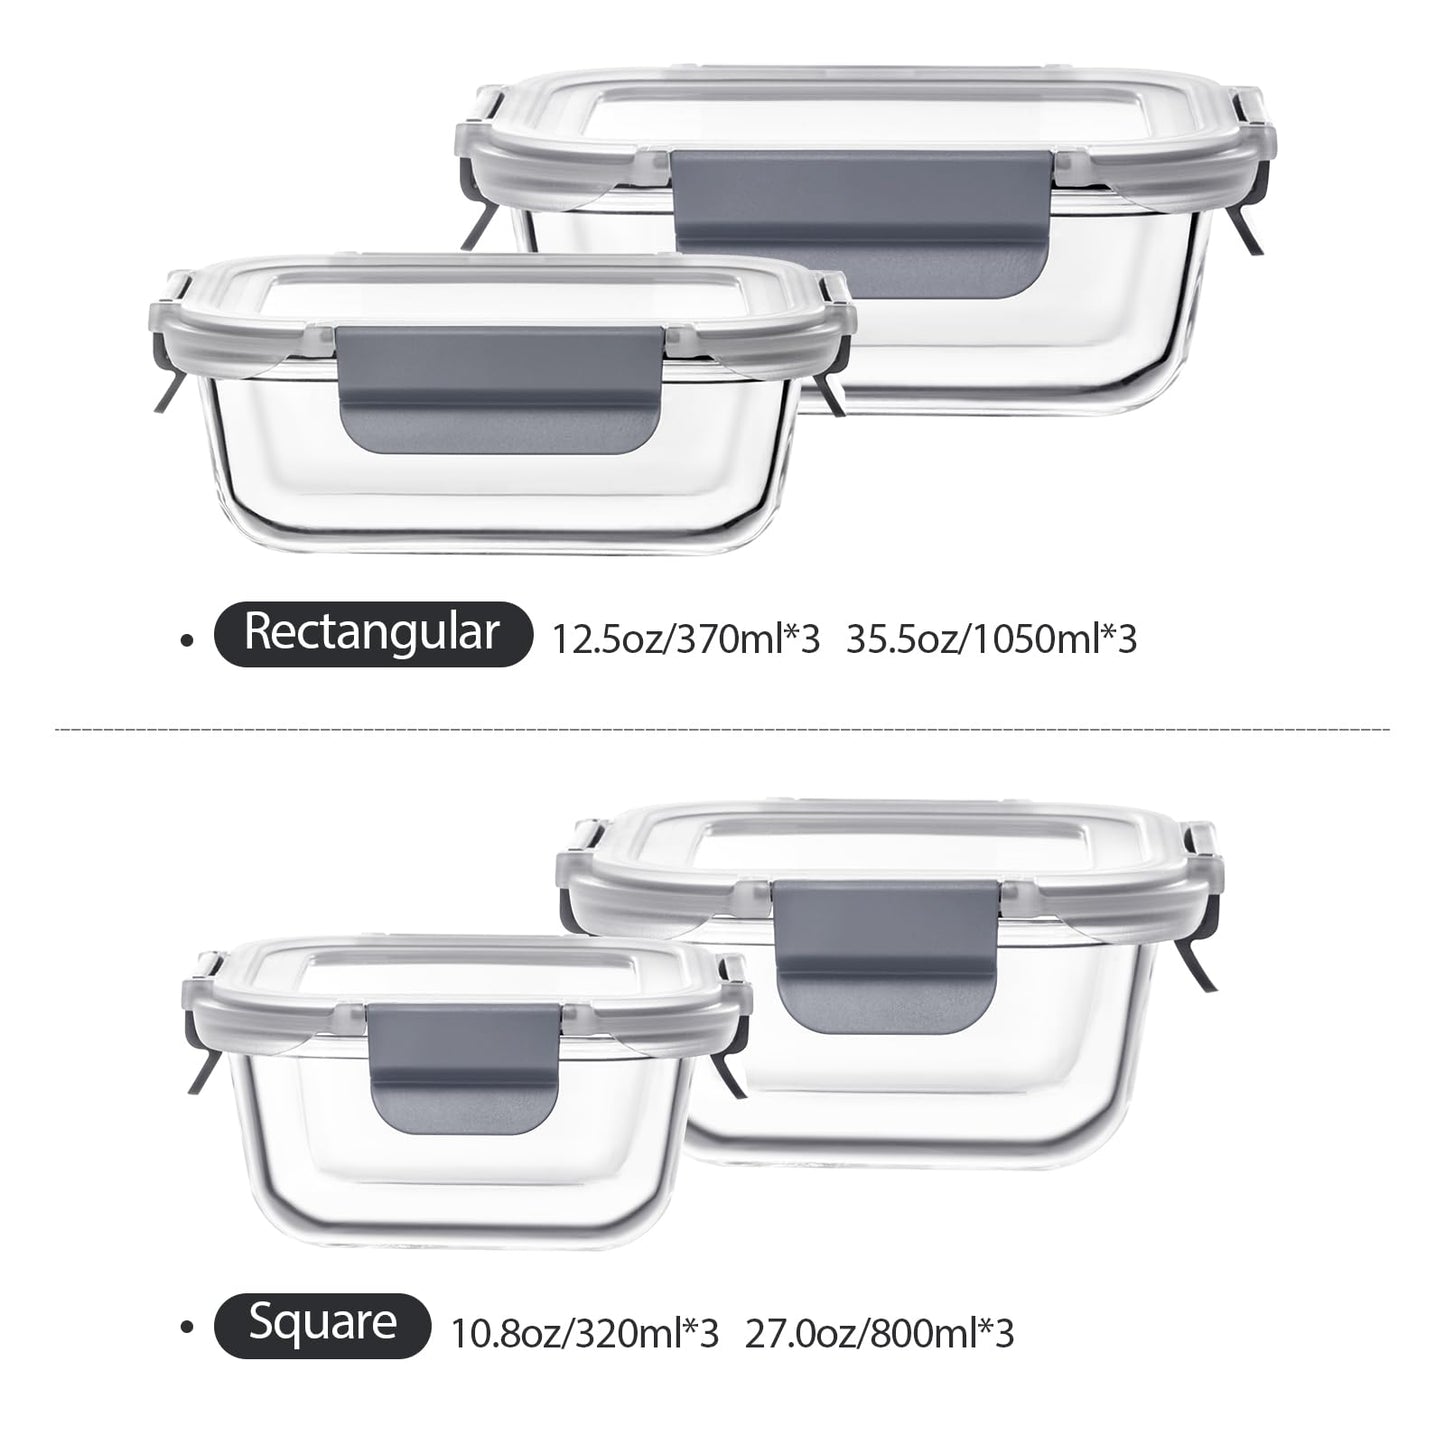 24 Pieces Glass Food Storage Containers with Lids,Glass Meal Prep Containers Set with Locking Lids,Airtight Glass Lunch Container for Kitchen,BPA Free(12 Lids & 12 Containers)